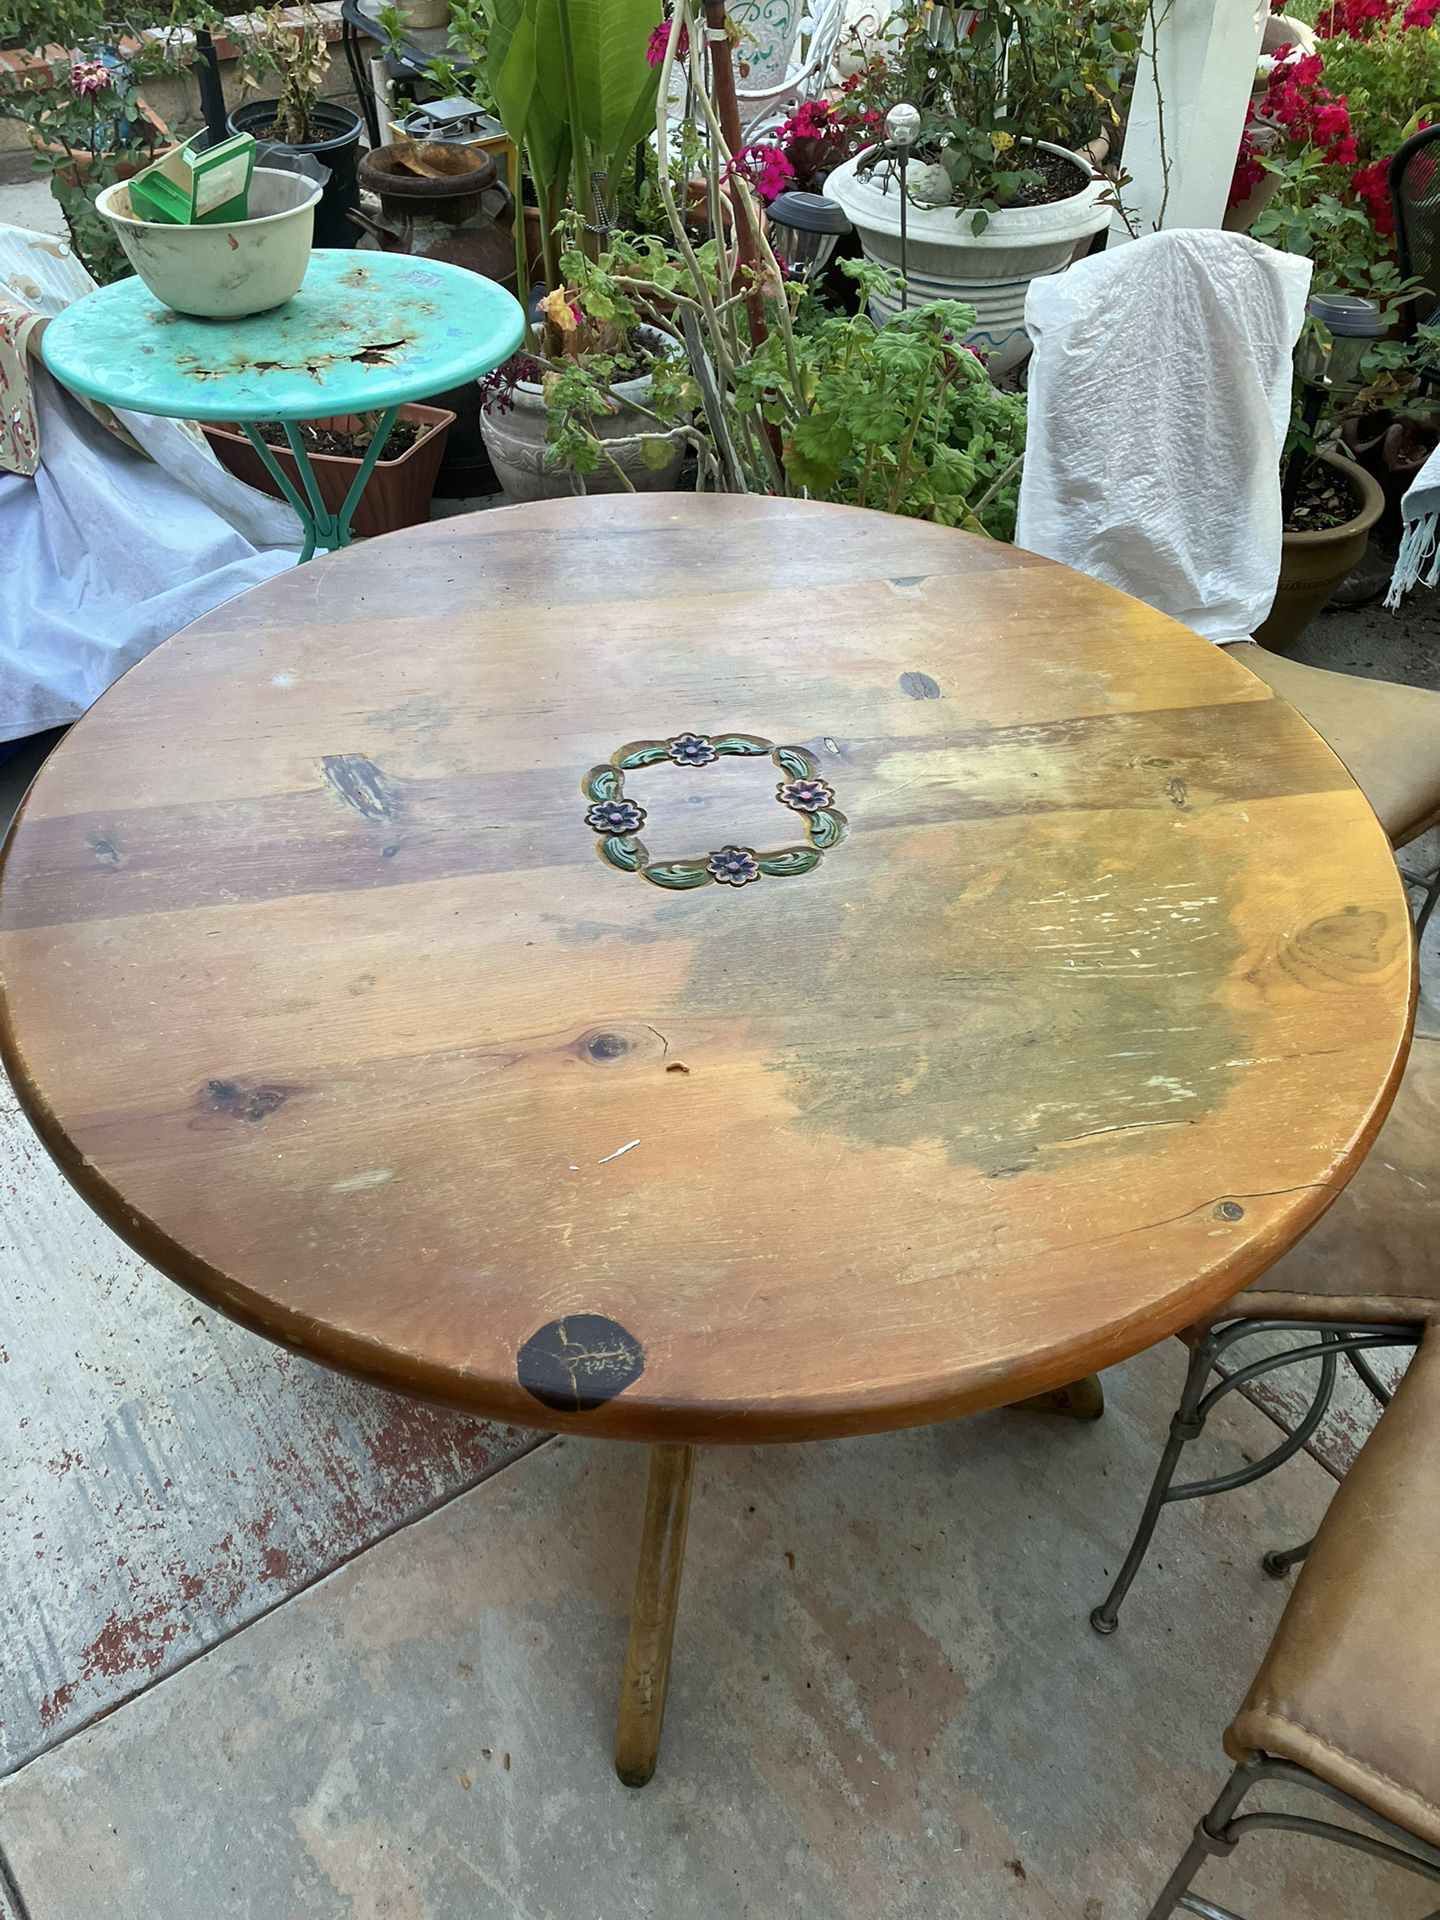 42” Round Wood Table With 4 Chairs